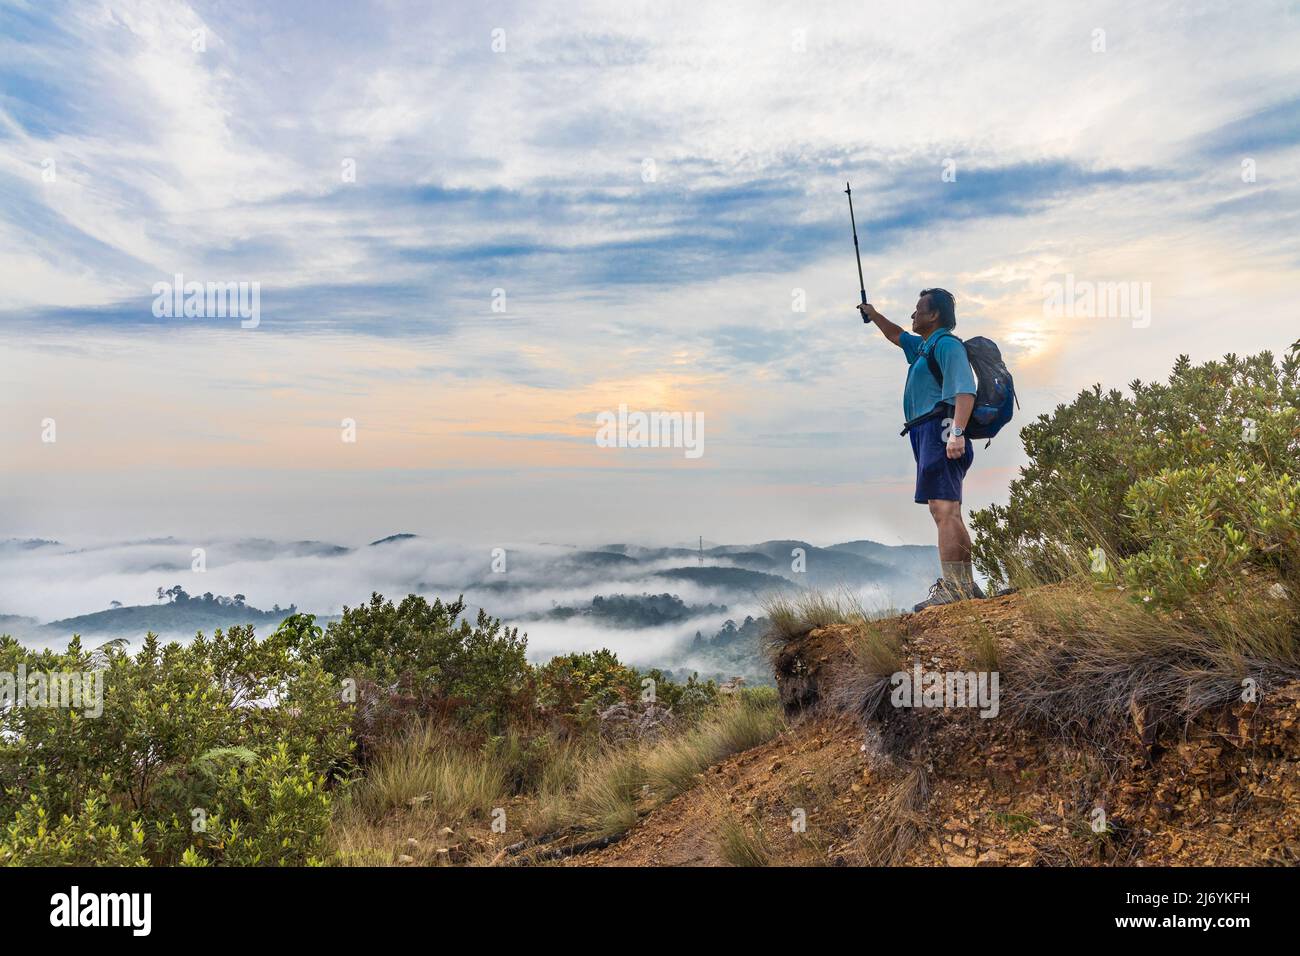 Hiker Asian man standing on peak of mountain with cloud scape raises hand to signify success Stock Photo